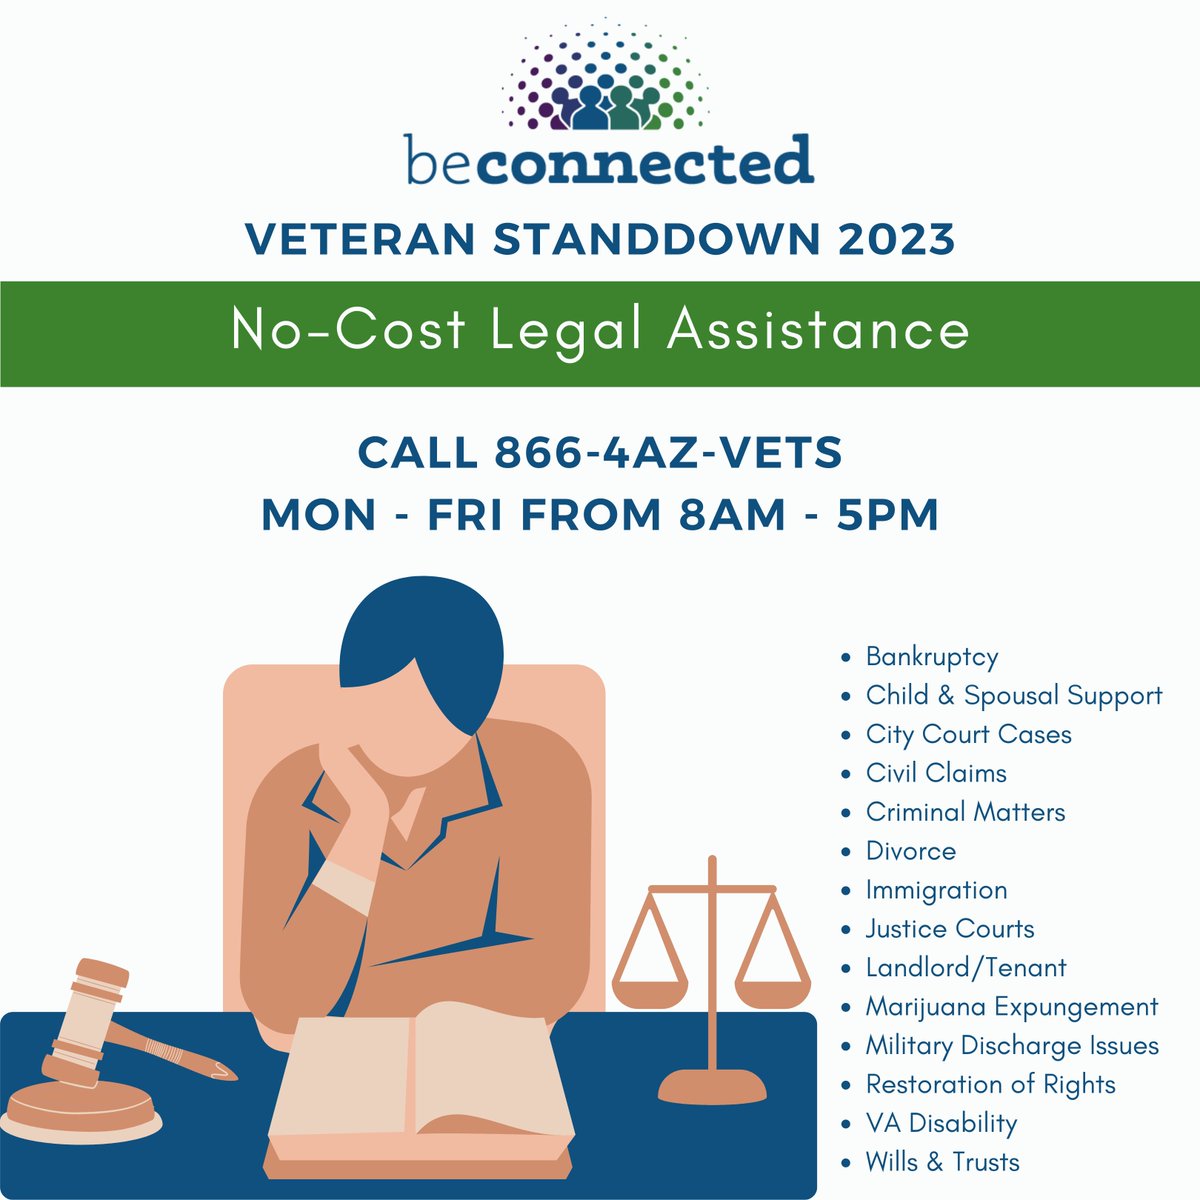 No-cost legal assistance is available through 4/21 for service members, #veterans & their families in Maricopa County. 📞Call 866-429-8387 Mon-Fri 8 AM-5 PM and ask for a📜 legal screening to start the process. 

⚖️#LegalHelp #BeConnected #VeteranStandDown #MaricopaCounty